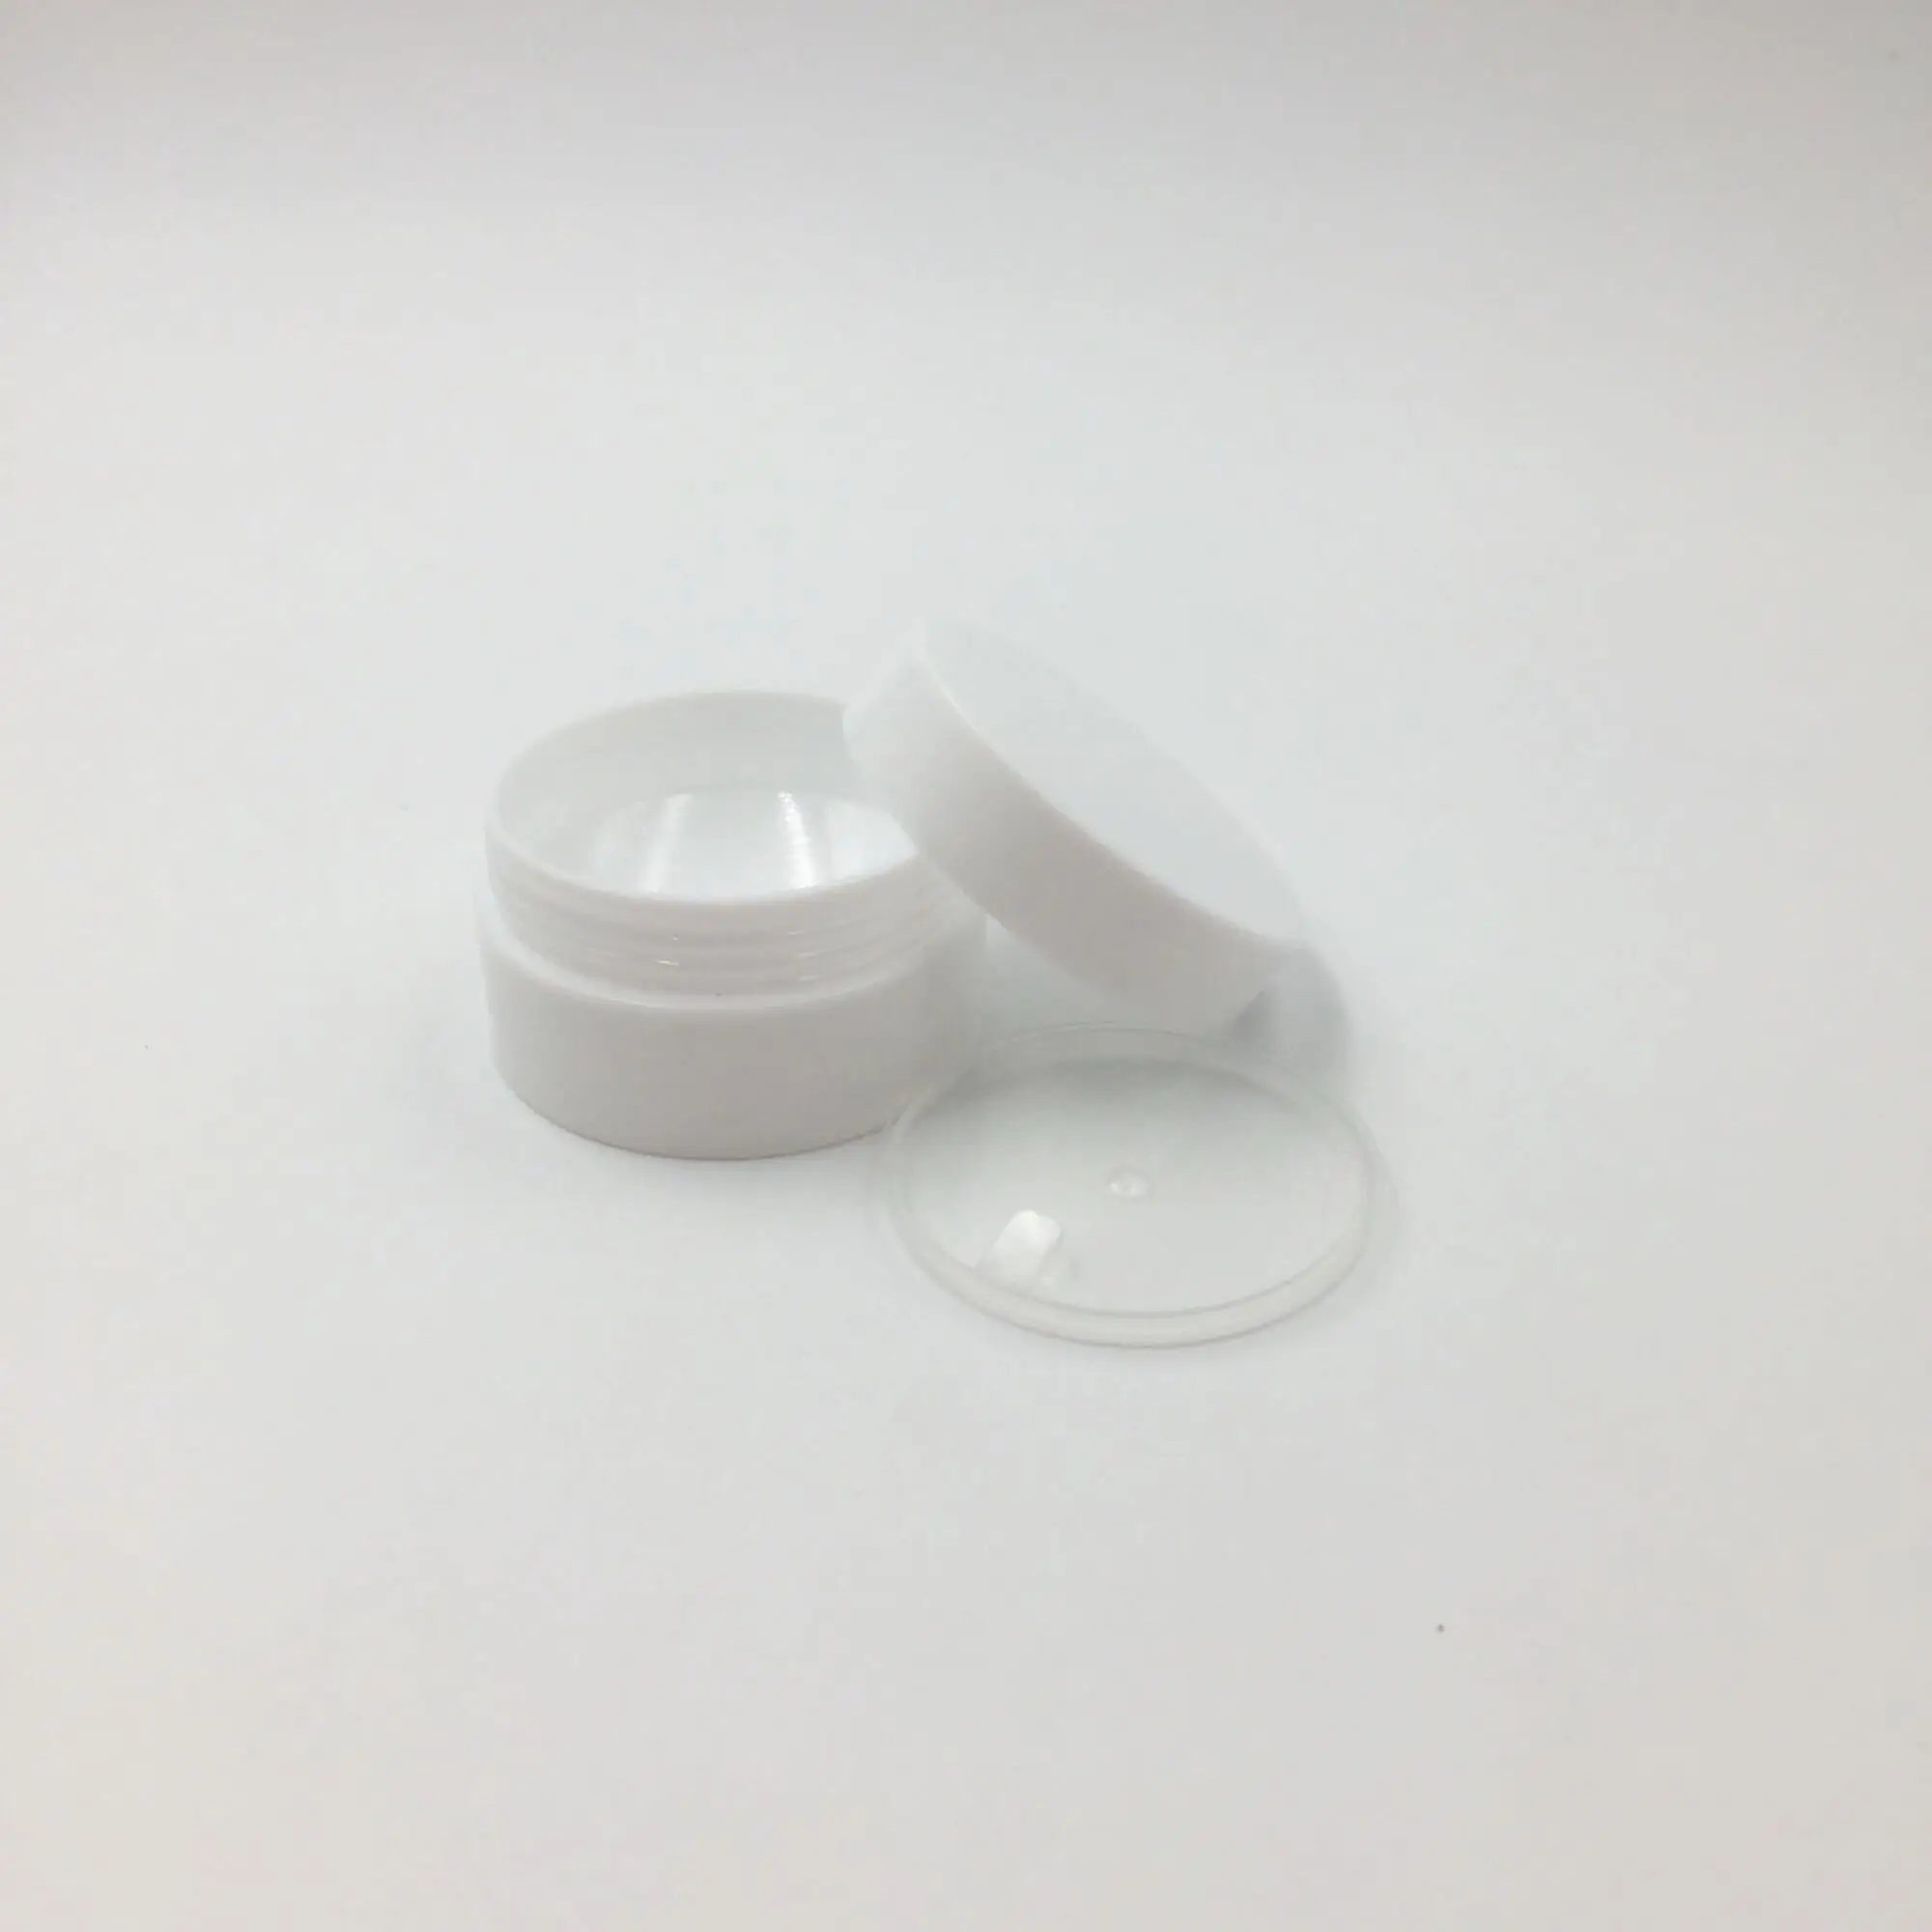 Free shipping 200pcs/lot 10g PP White Small cosmetic cream Jar with inner lid empty plastic make up container pot for eye cream